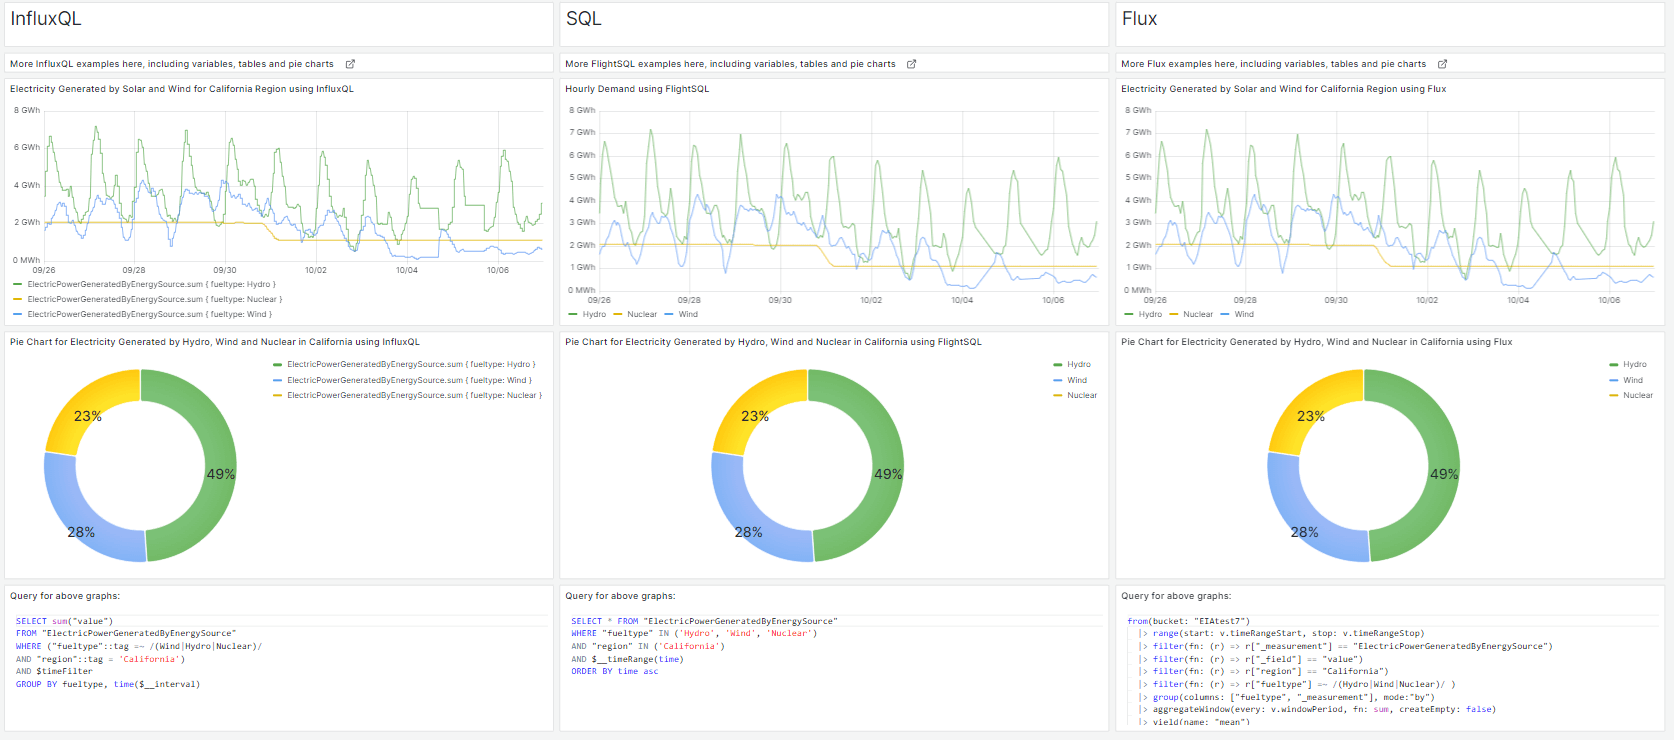 A Grafana dashboard with time series and pie charts using mixed InfluxDB queries.